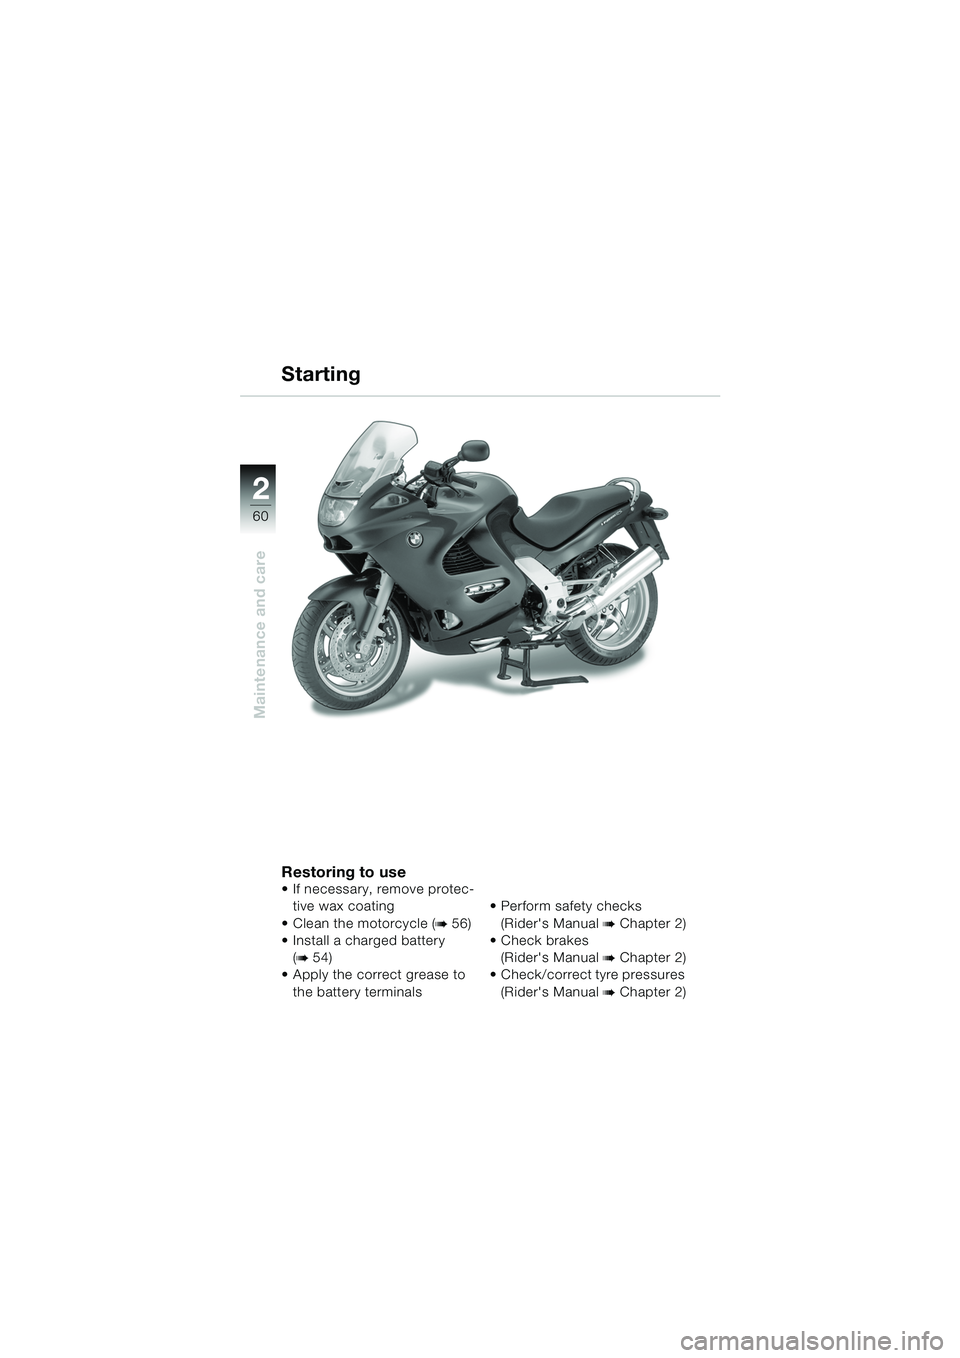 BMW MOTORRAD K 1200 RS 2004  Riders Manual (in English) 60
Maintenance and care
2
Restoring to use
 If necessary, remove protec-tive wax coating
Clean the motorcycle (
b 56) 
 Install a charged battery 
(
b 54) 
 Apply the correct grease to 
the batter